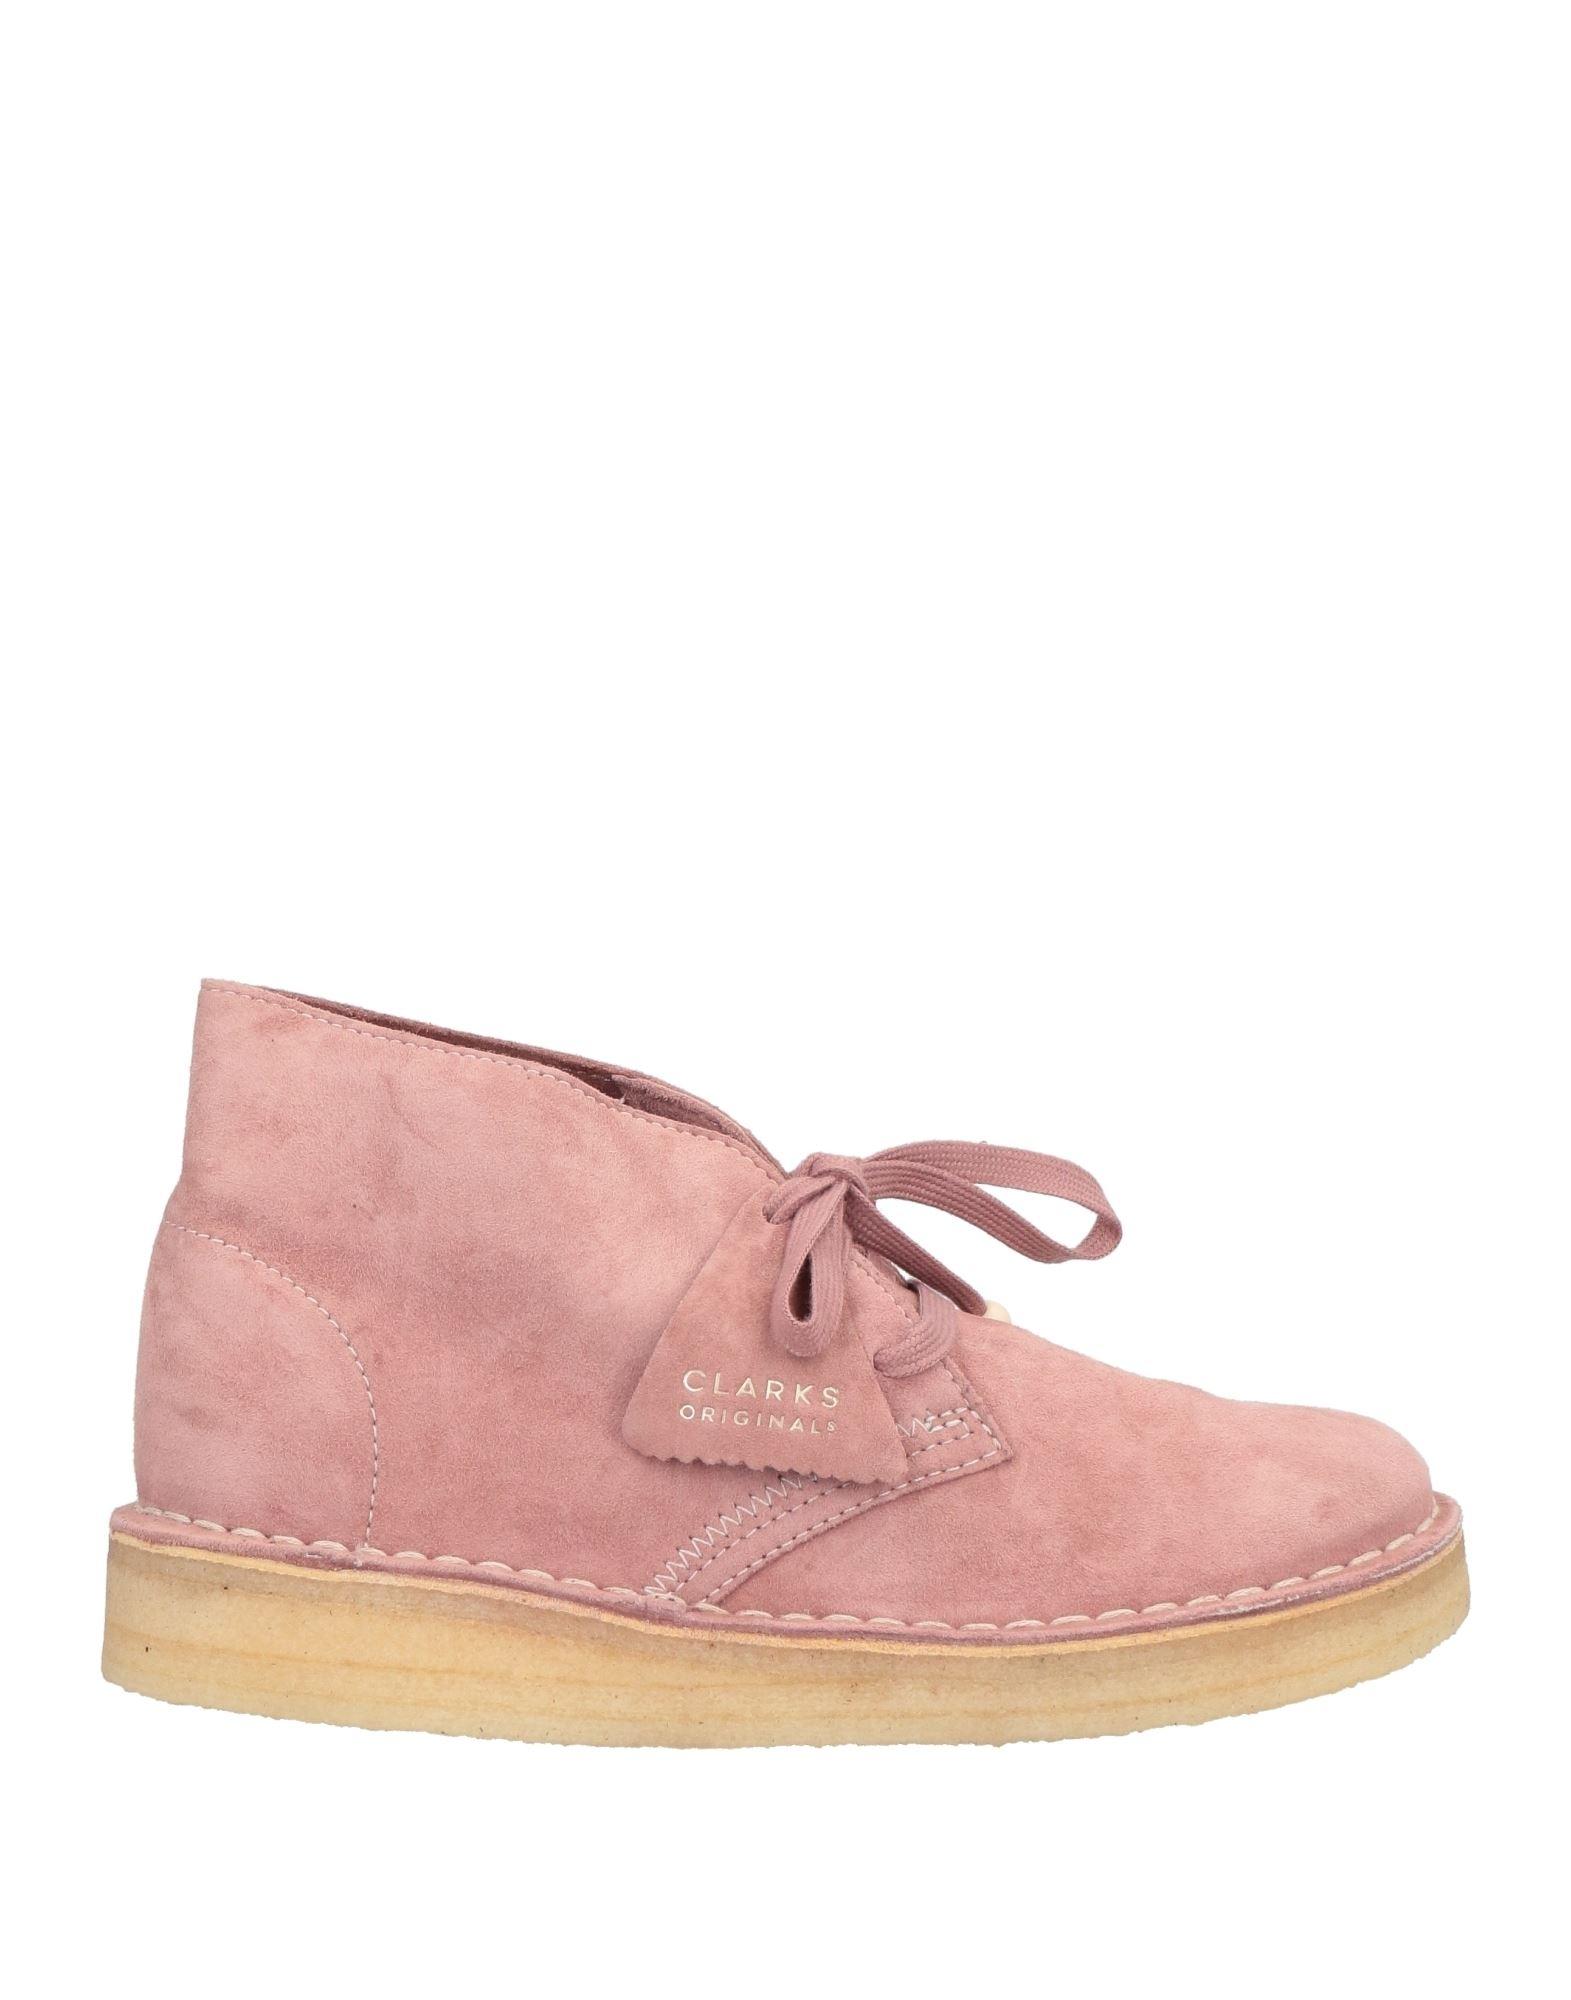 Clarks Leather Ankle Boots in Pastel Pink (Pink) | Lyst